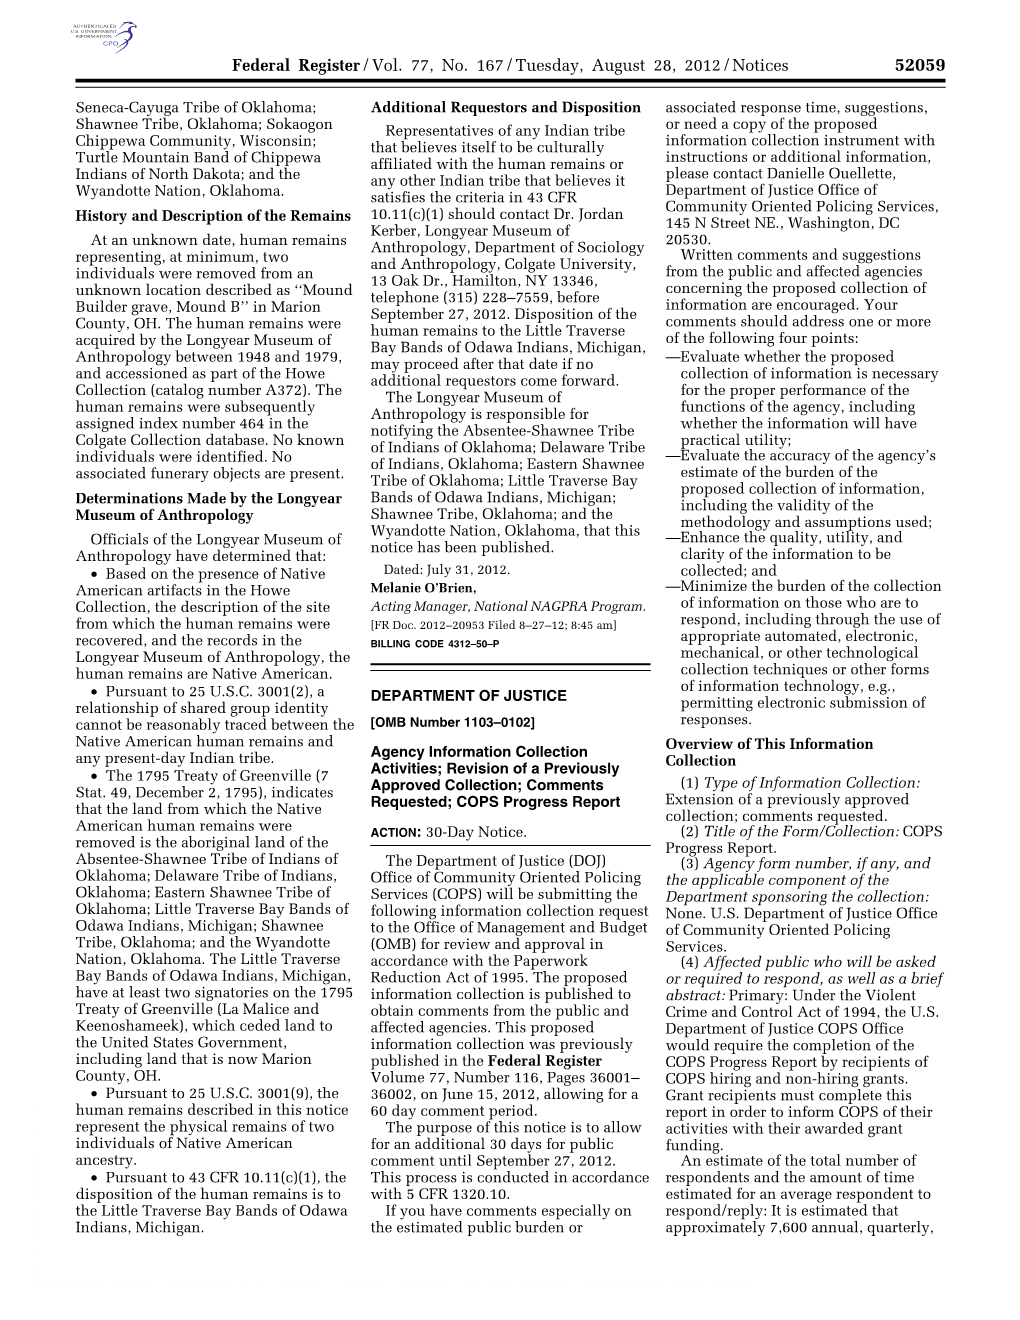 Federal Register/Vol. 77, No. 167/Tuesday, August 28, 2012/Notices